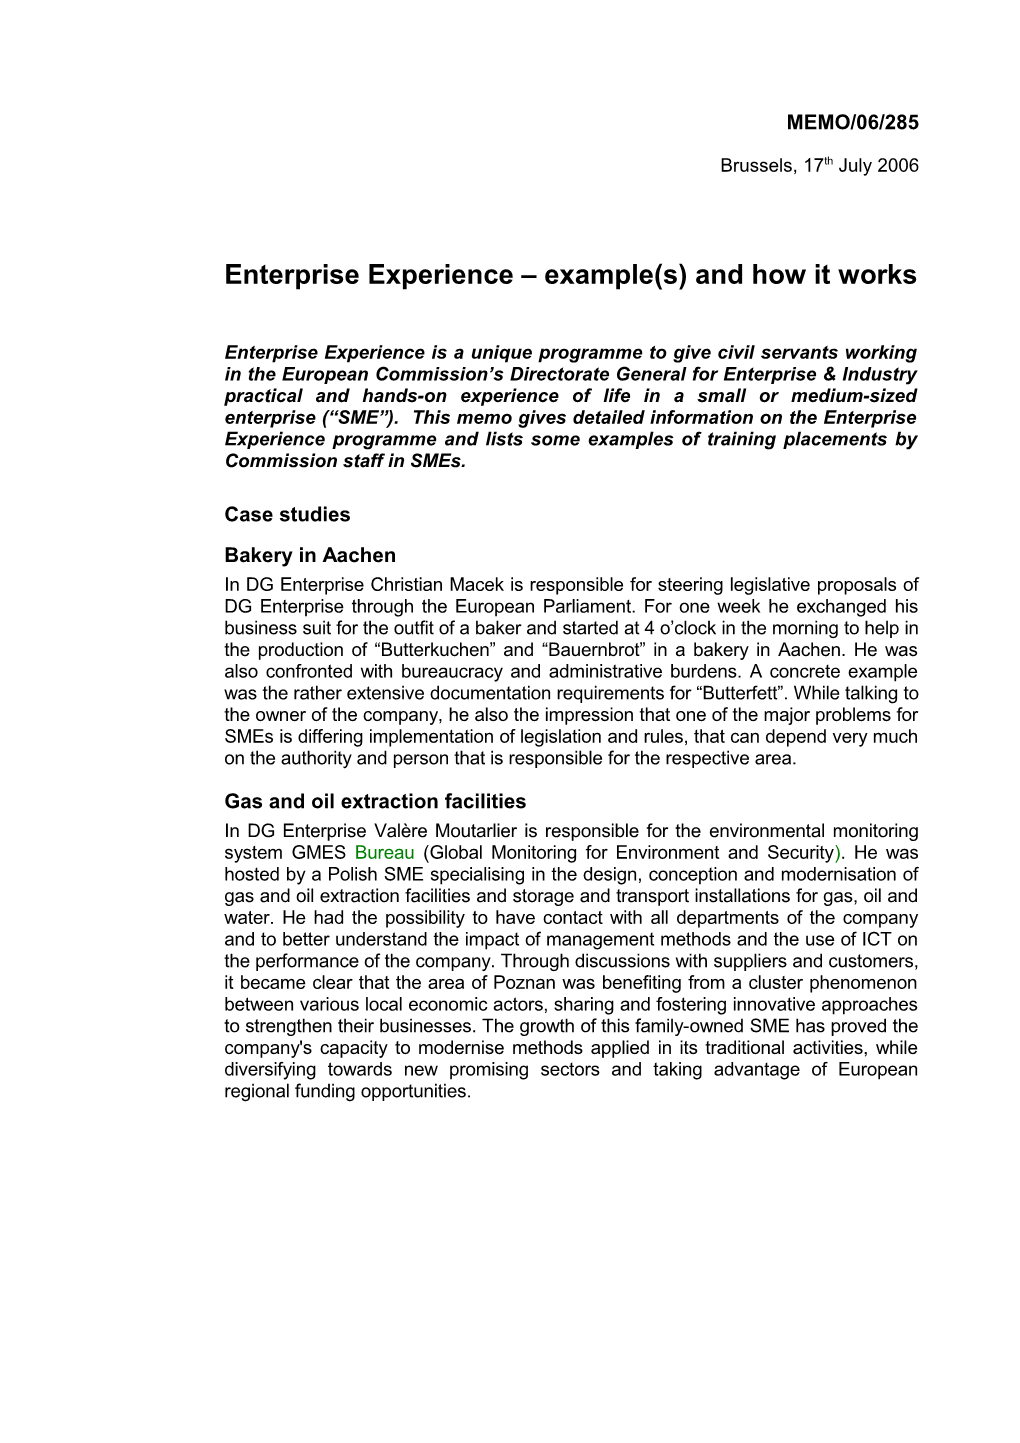 Enterprise Experience Example(S) and How It Works